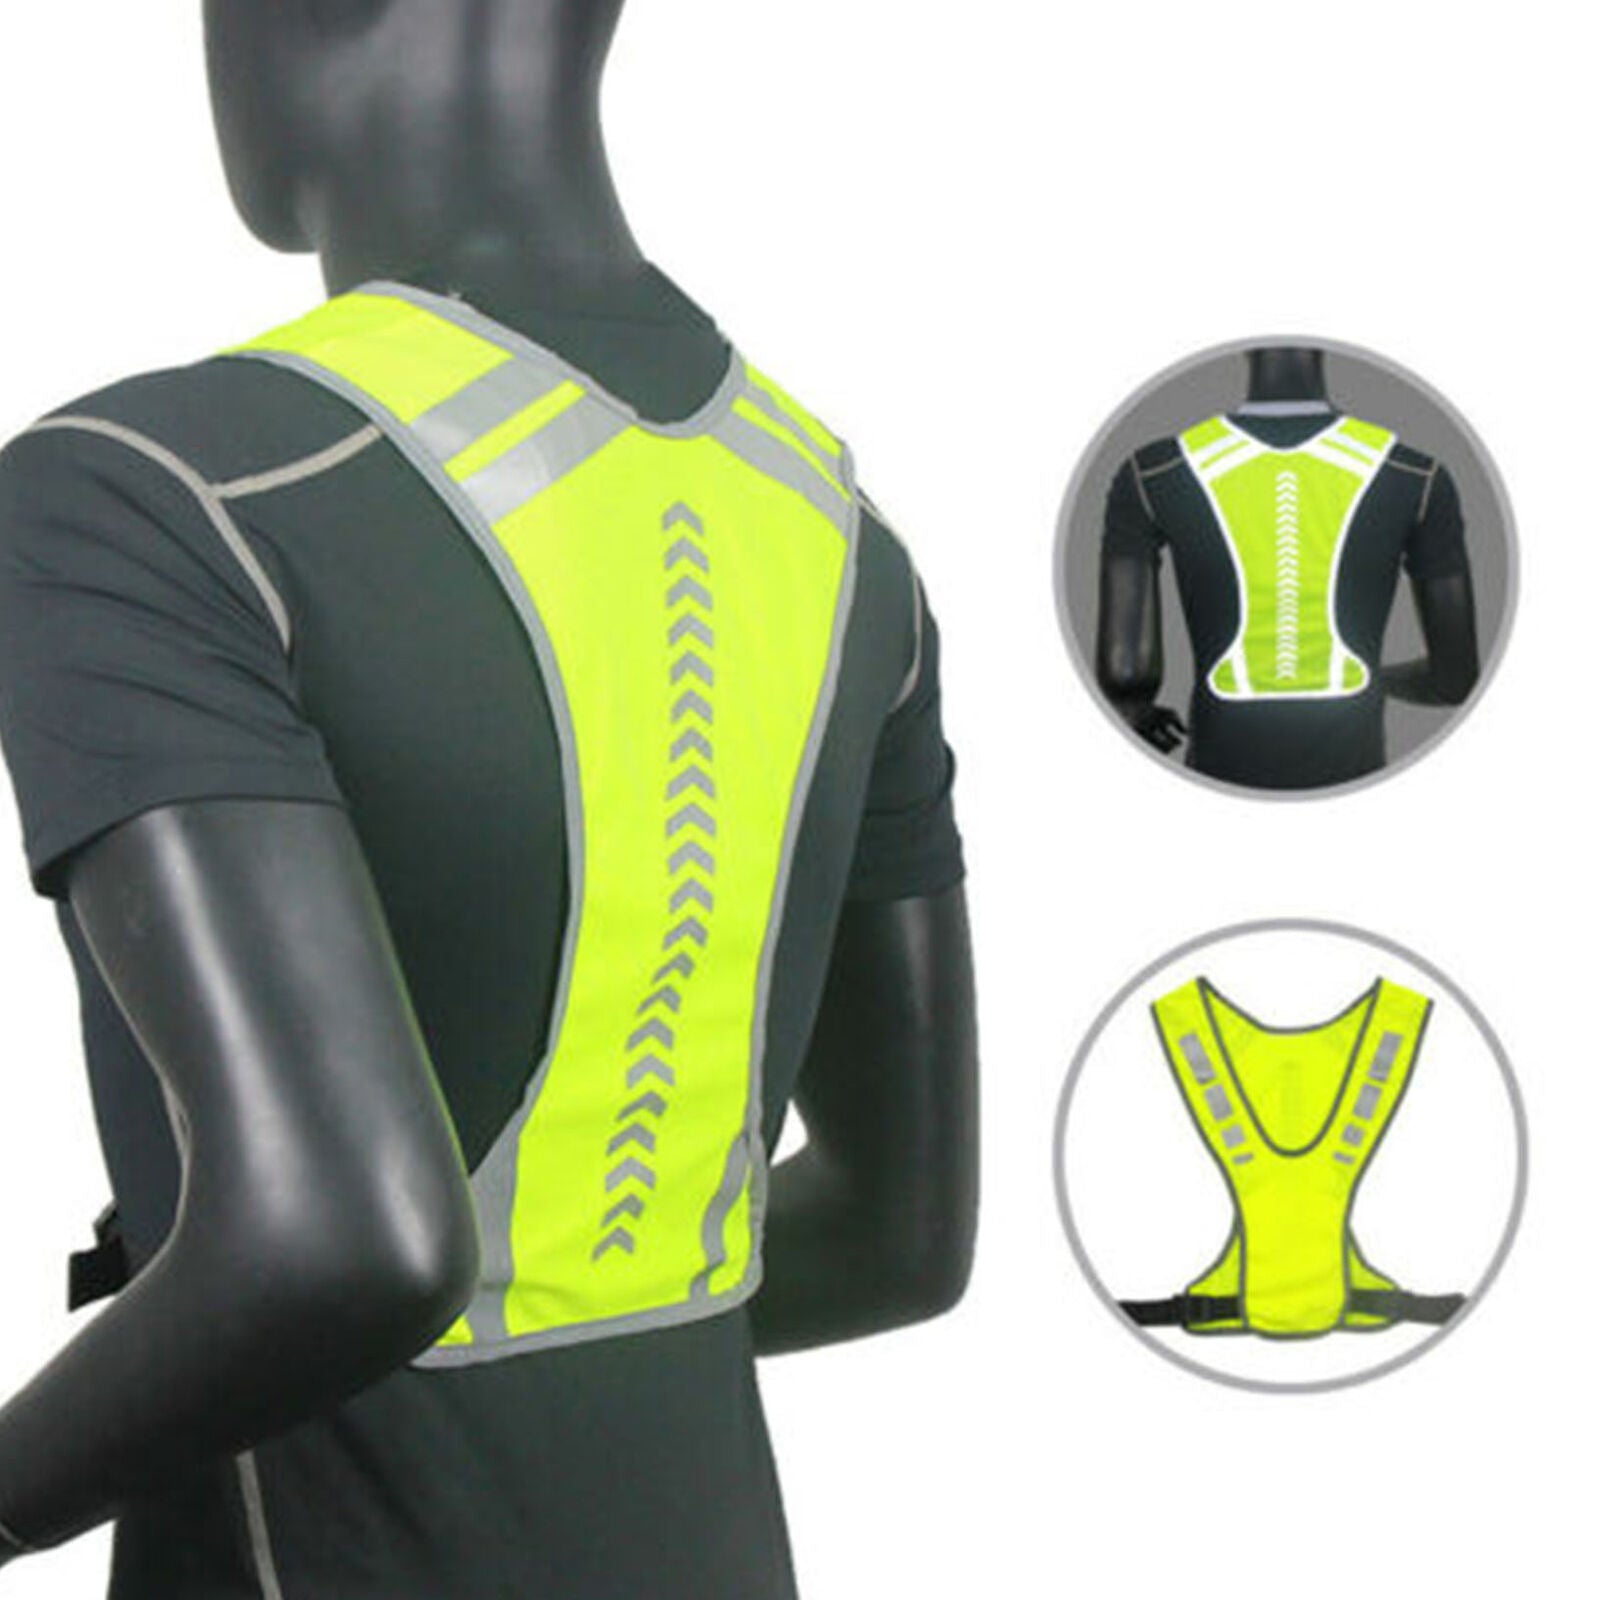 High Vis Safety Vest For Running Jogging Cycling Motorcycle Night Safe Jacket